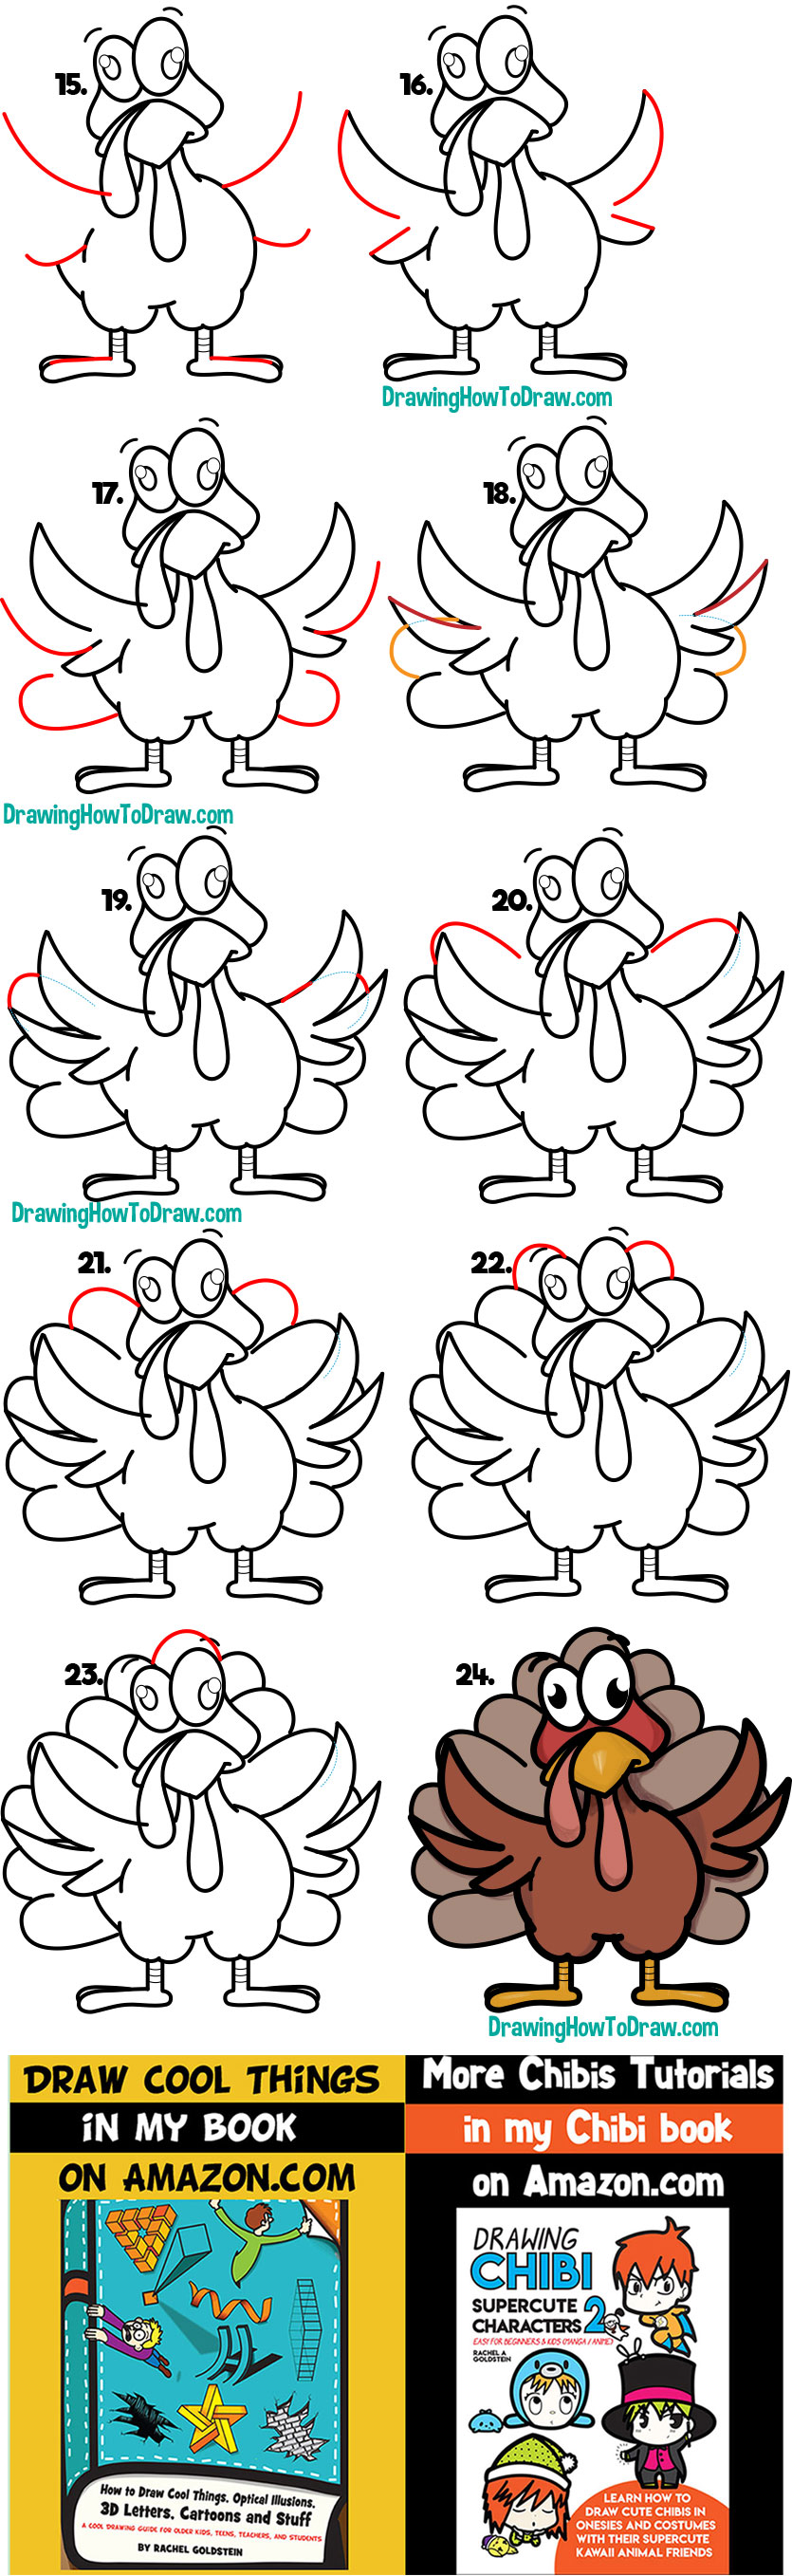 How to Draw a Cartoon Turkey for Thanksgiving Easy Step by Step Drawing Tutorial for Beginners